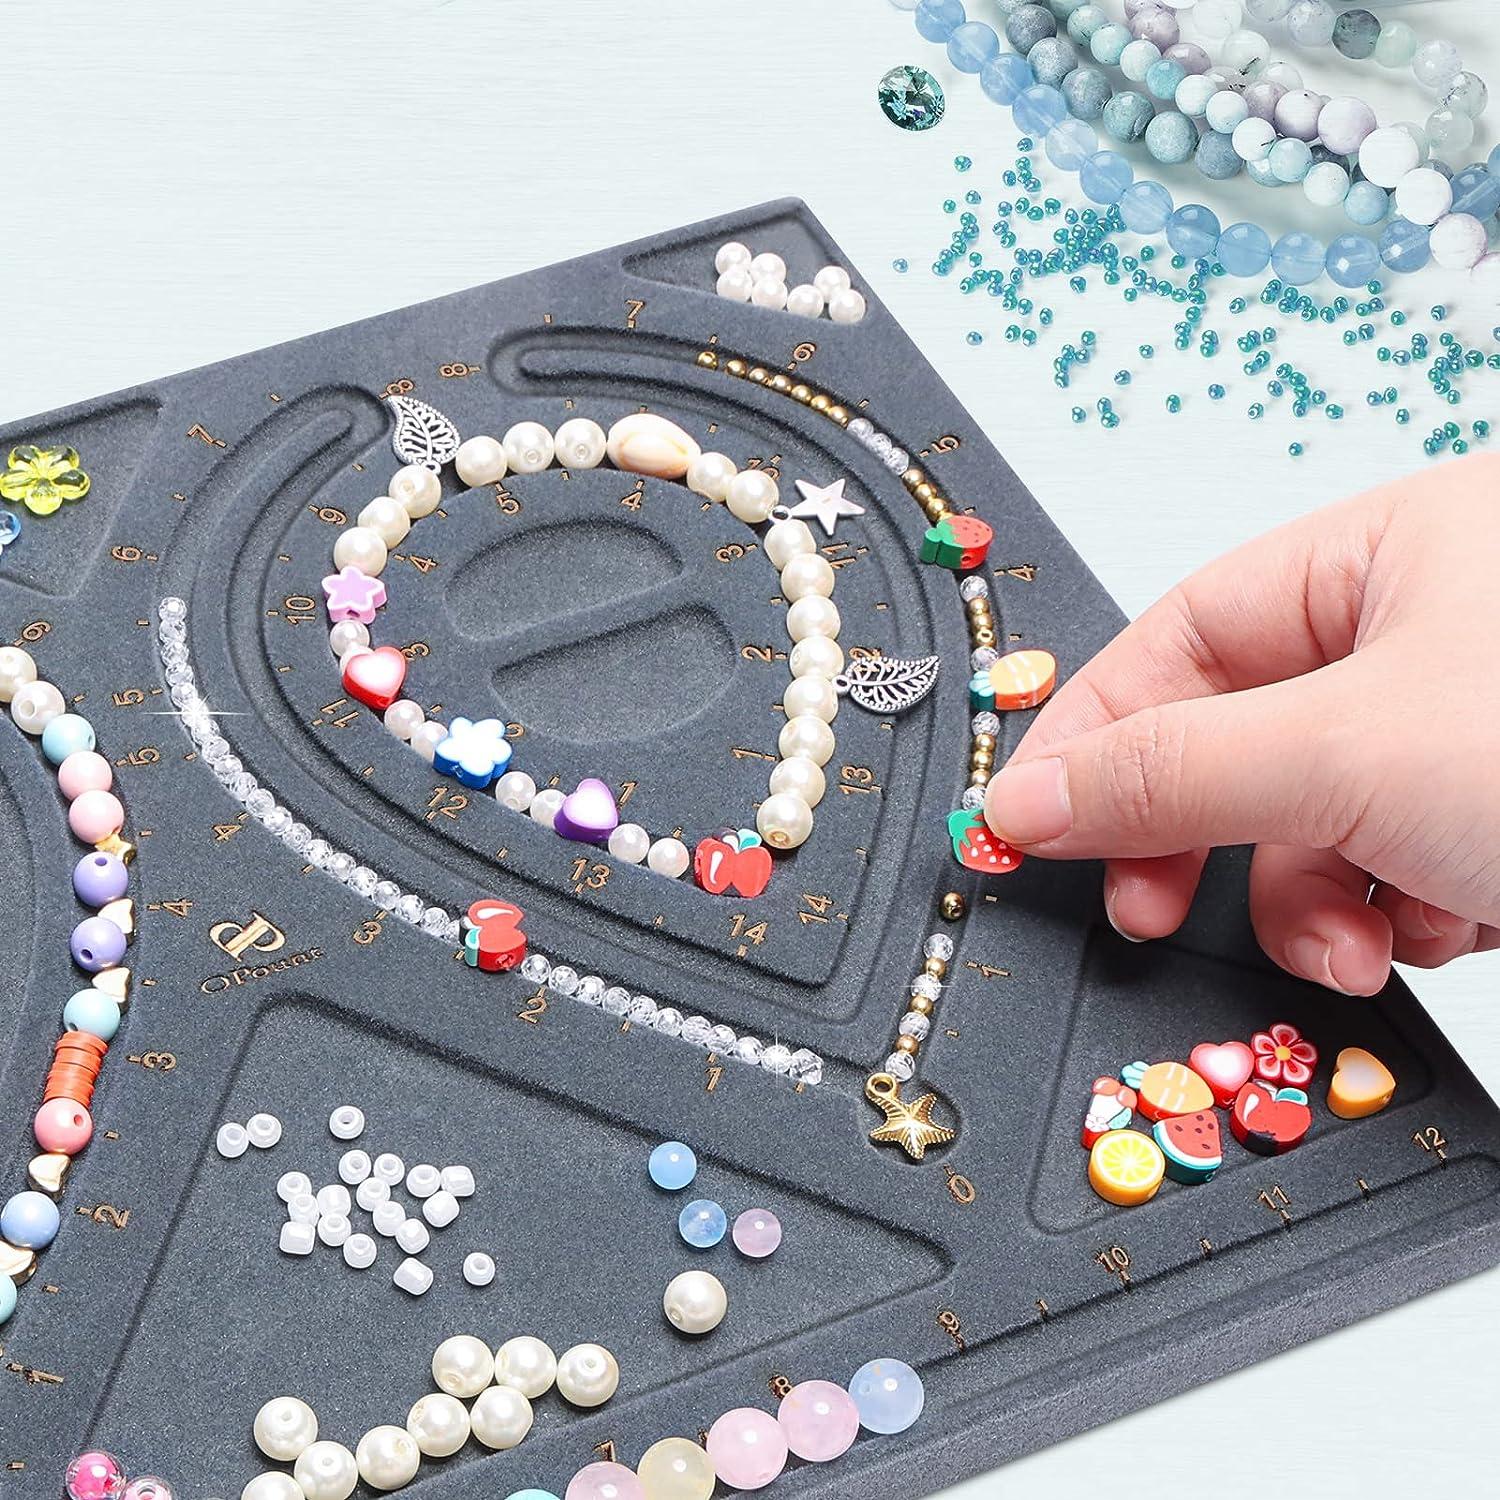 PP OPOUNT Wooden Jewelry Design Board, Flocked Bead Board for